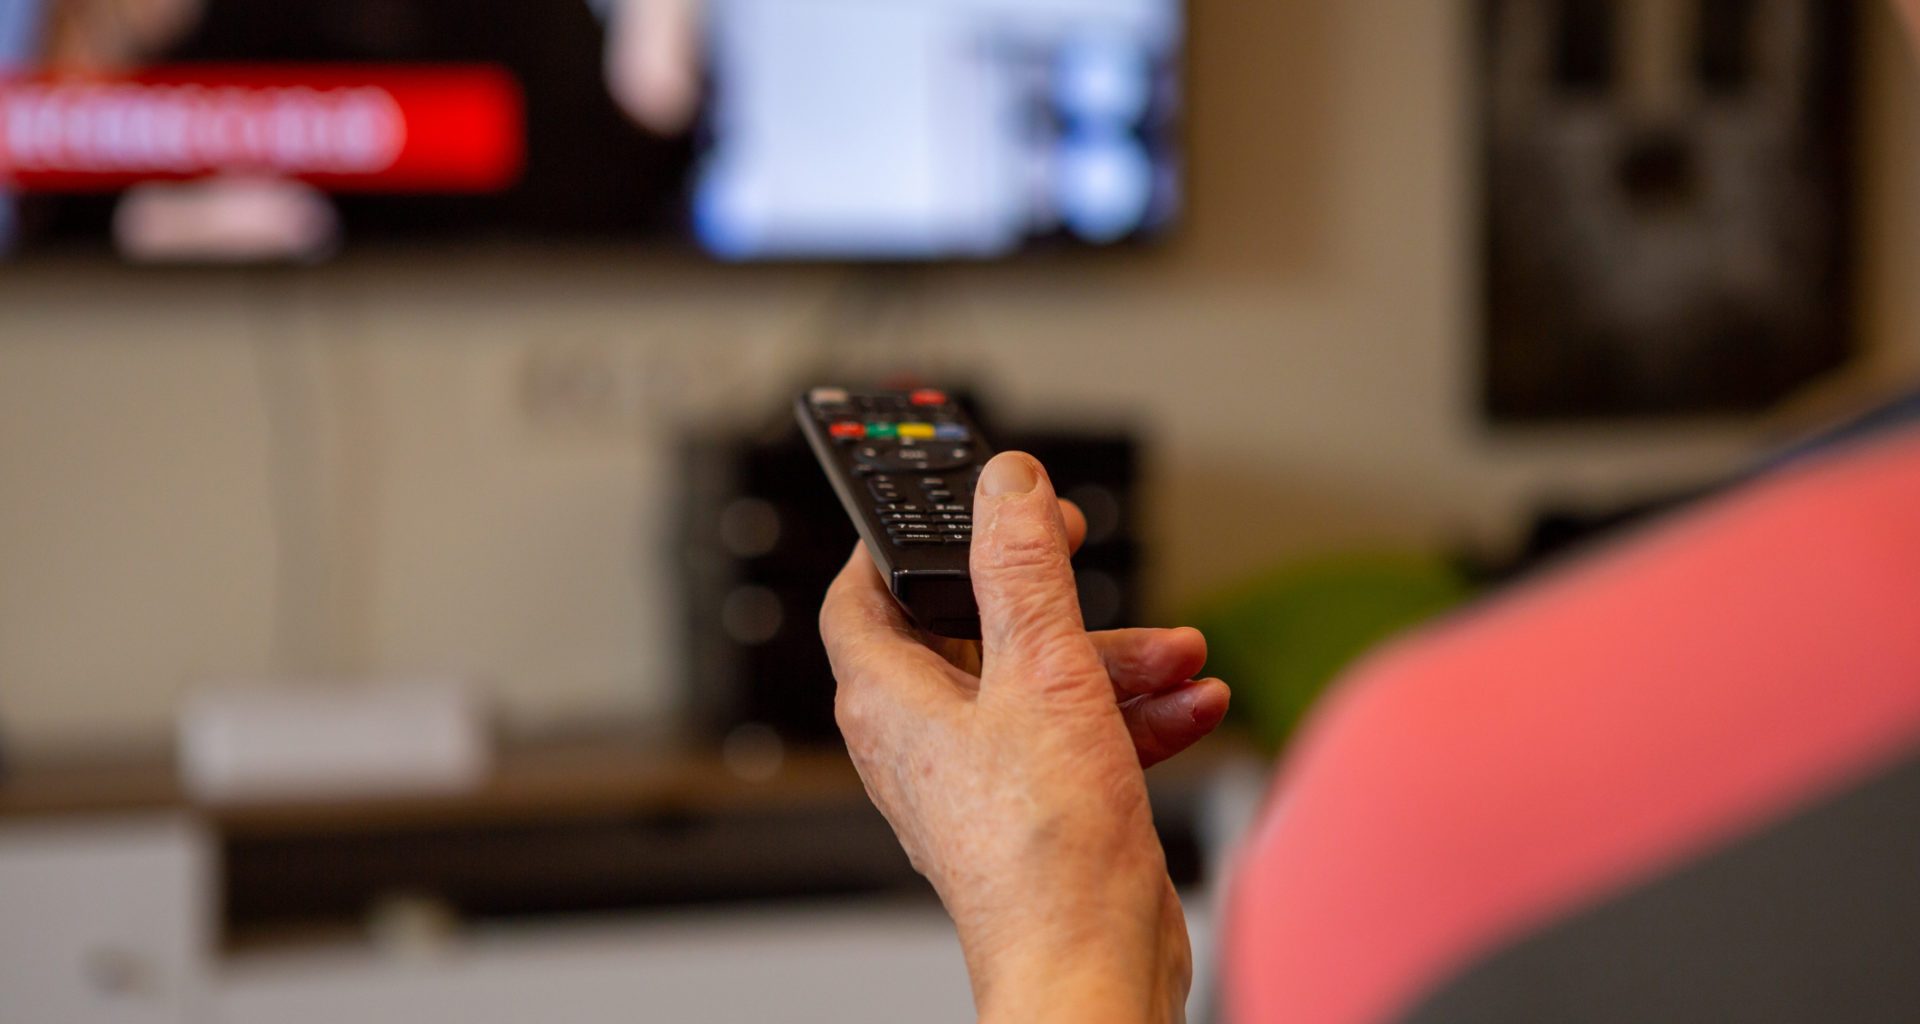 Claim Scotland has "lowest amount" of TV licence payment is Unsupported 5